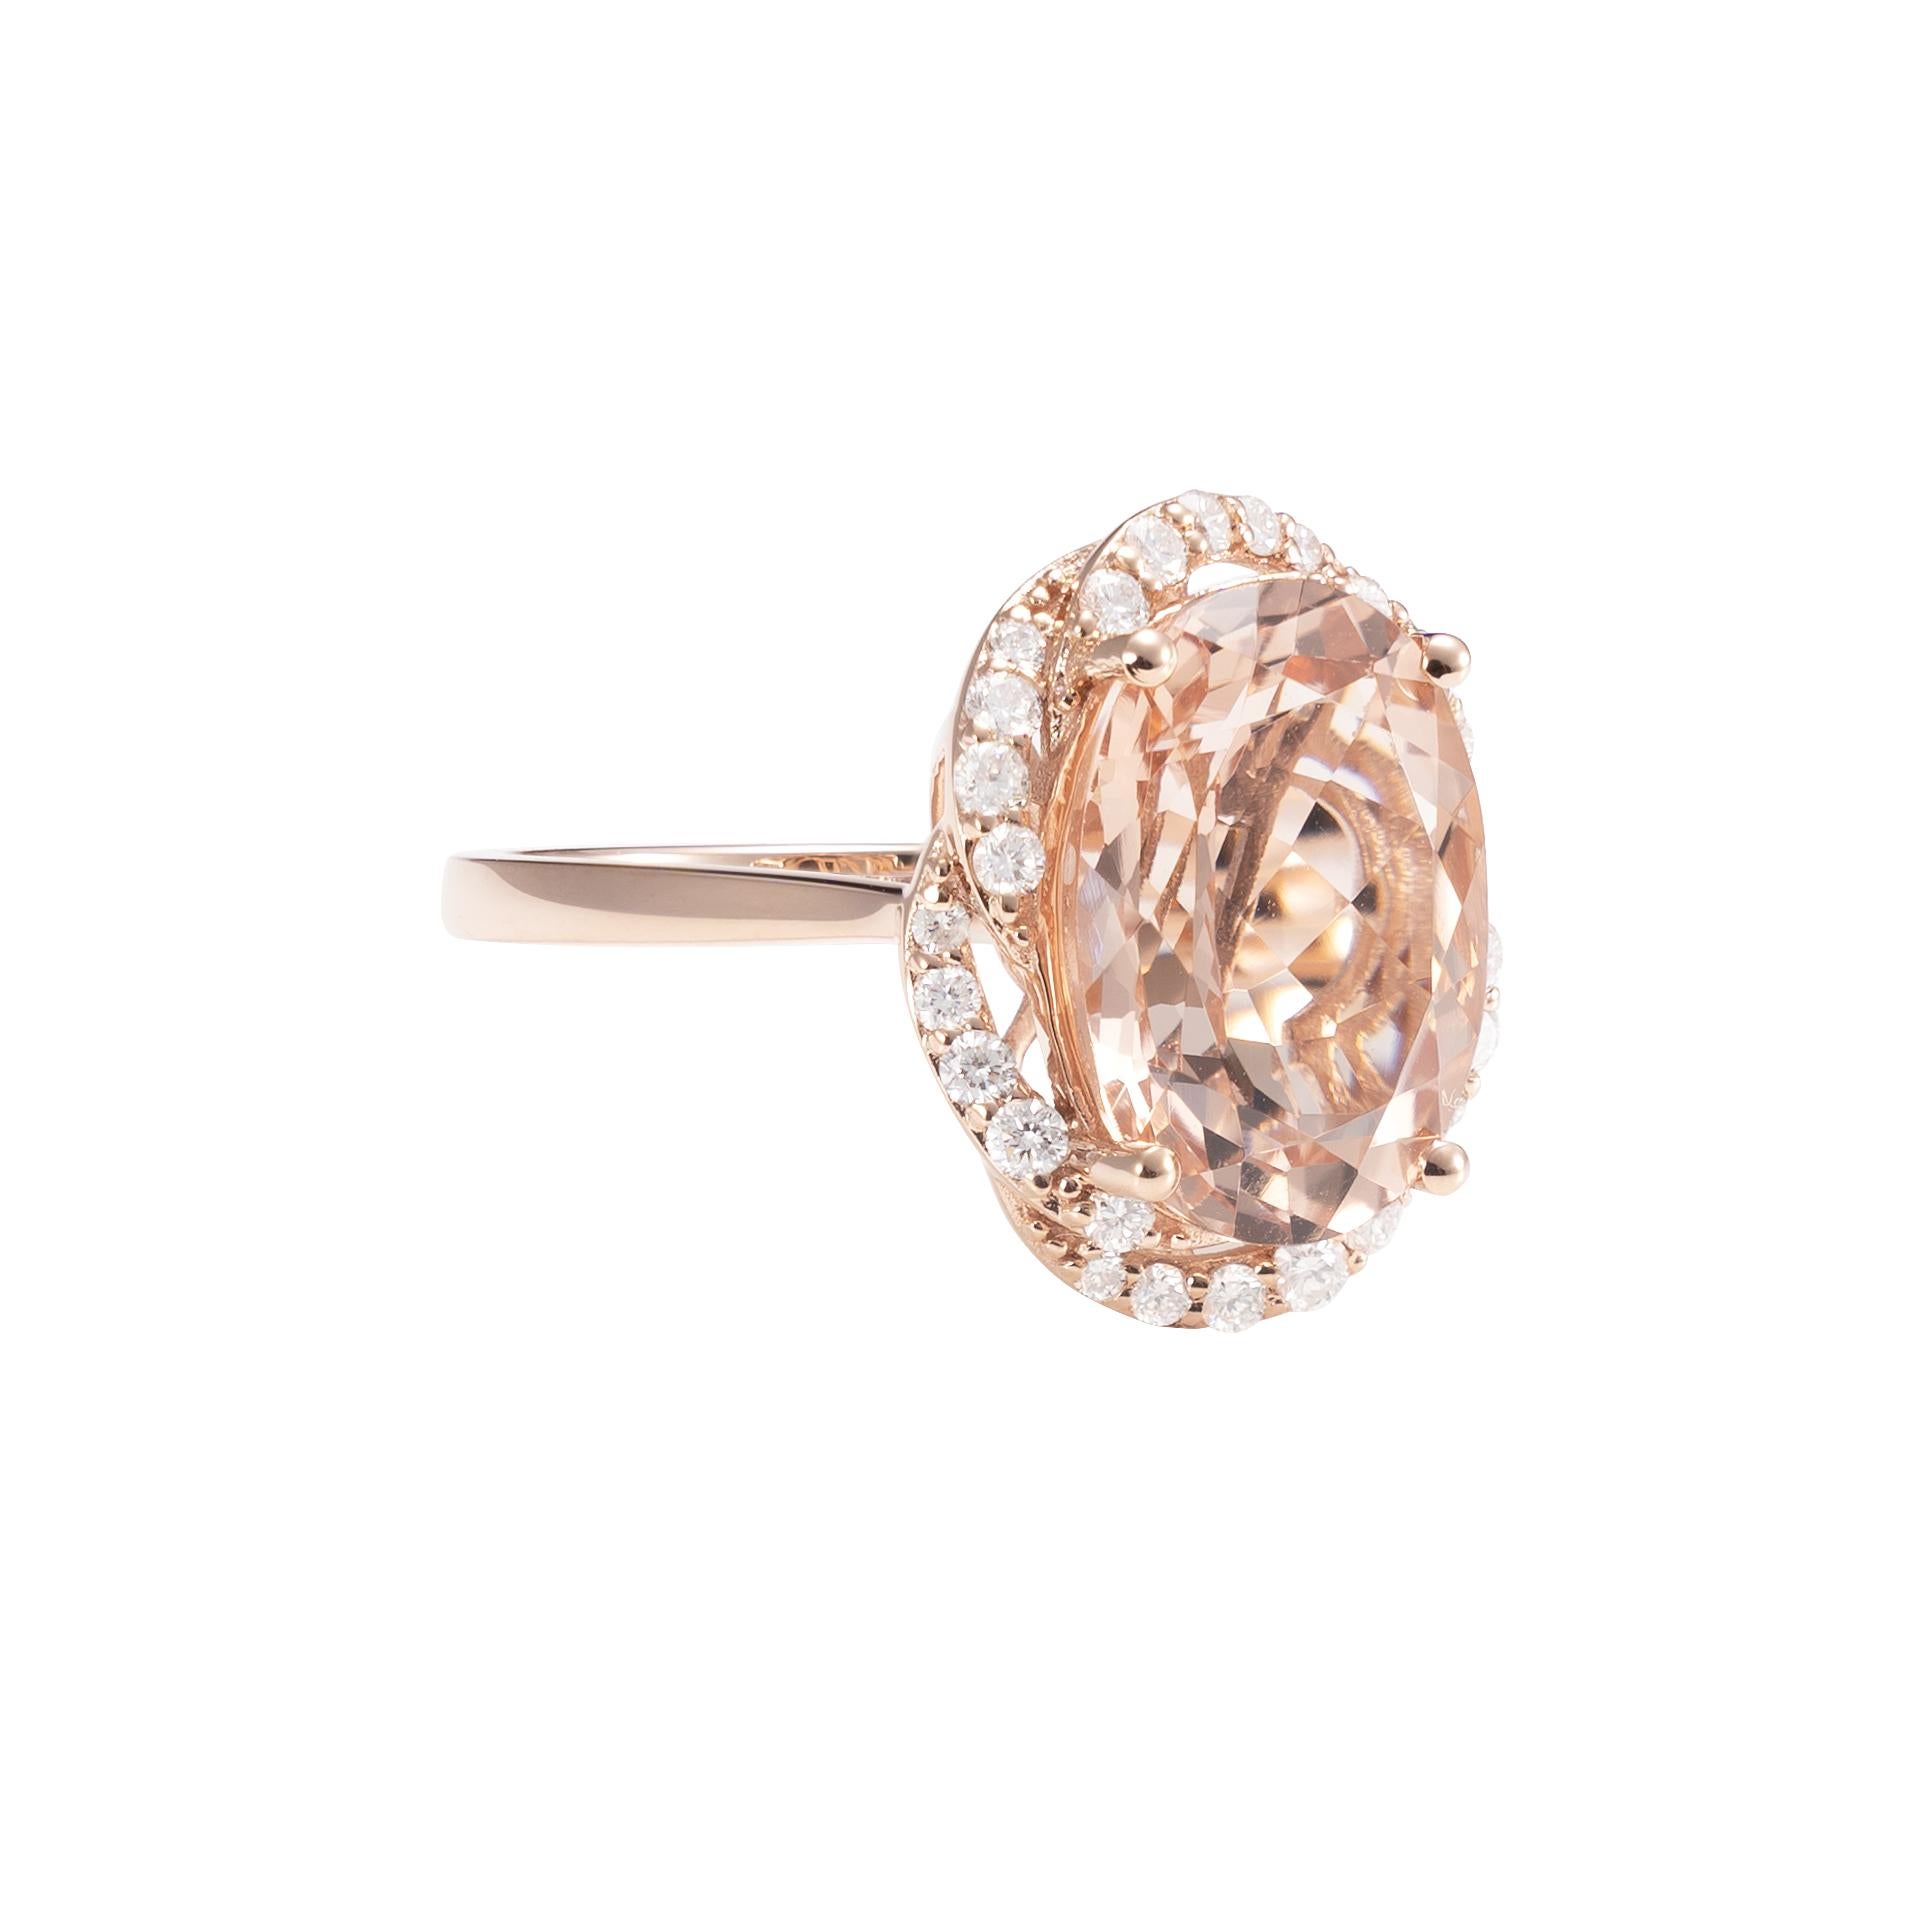 This collection features an array of magnificent morganites! Accented with diamonds these rings are made in rose gold and present a classic yet elegant look. 

Classic morganite ring in 18K rose gold with diamonds. 

Morganite: 5.79 carat oval